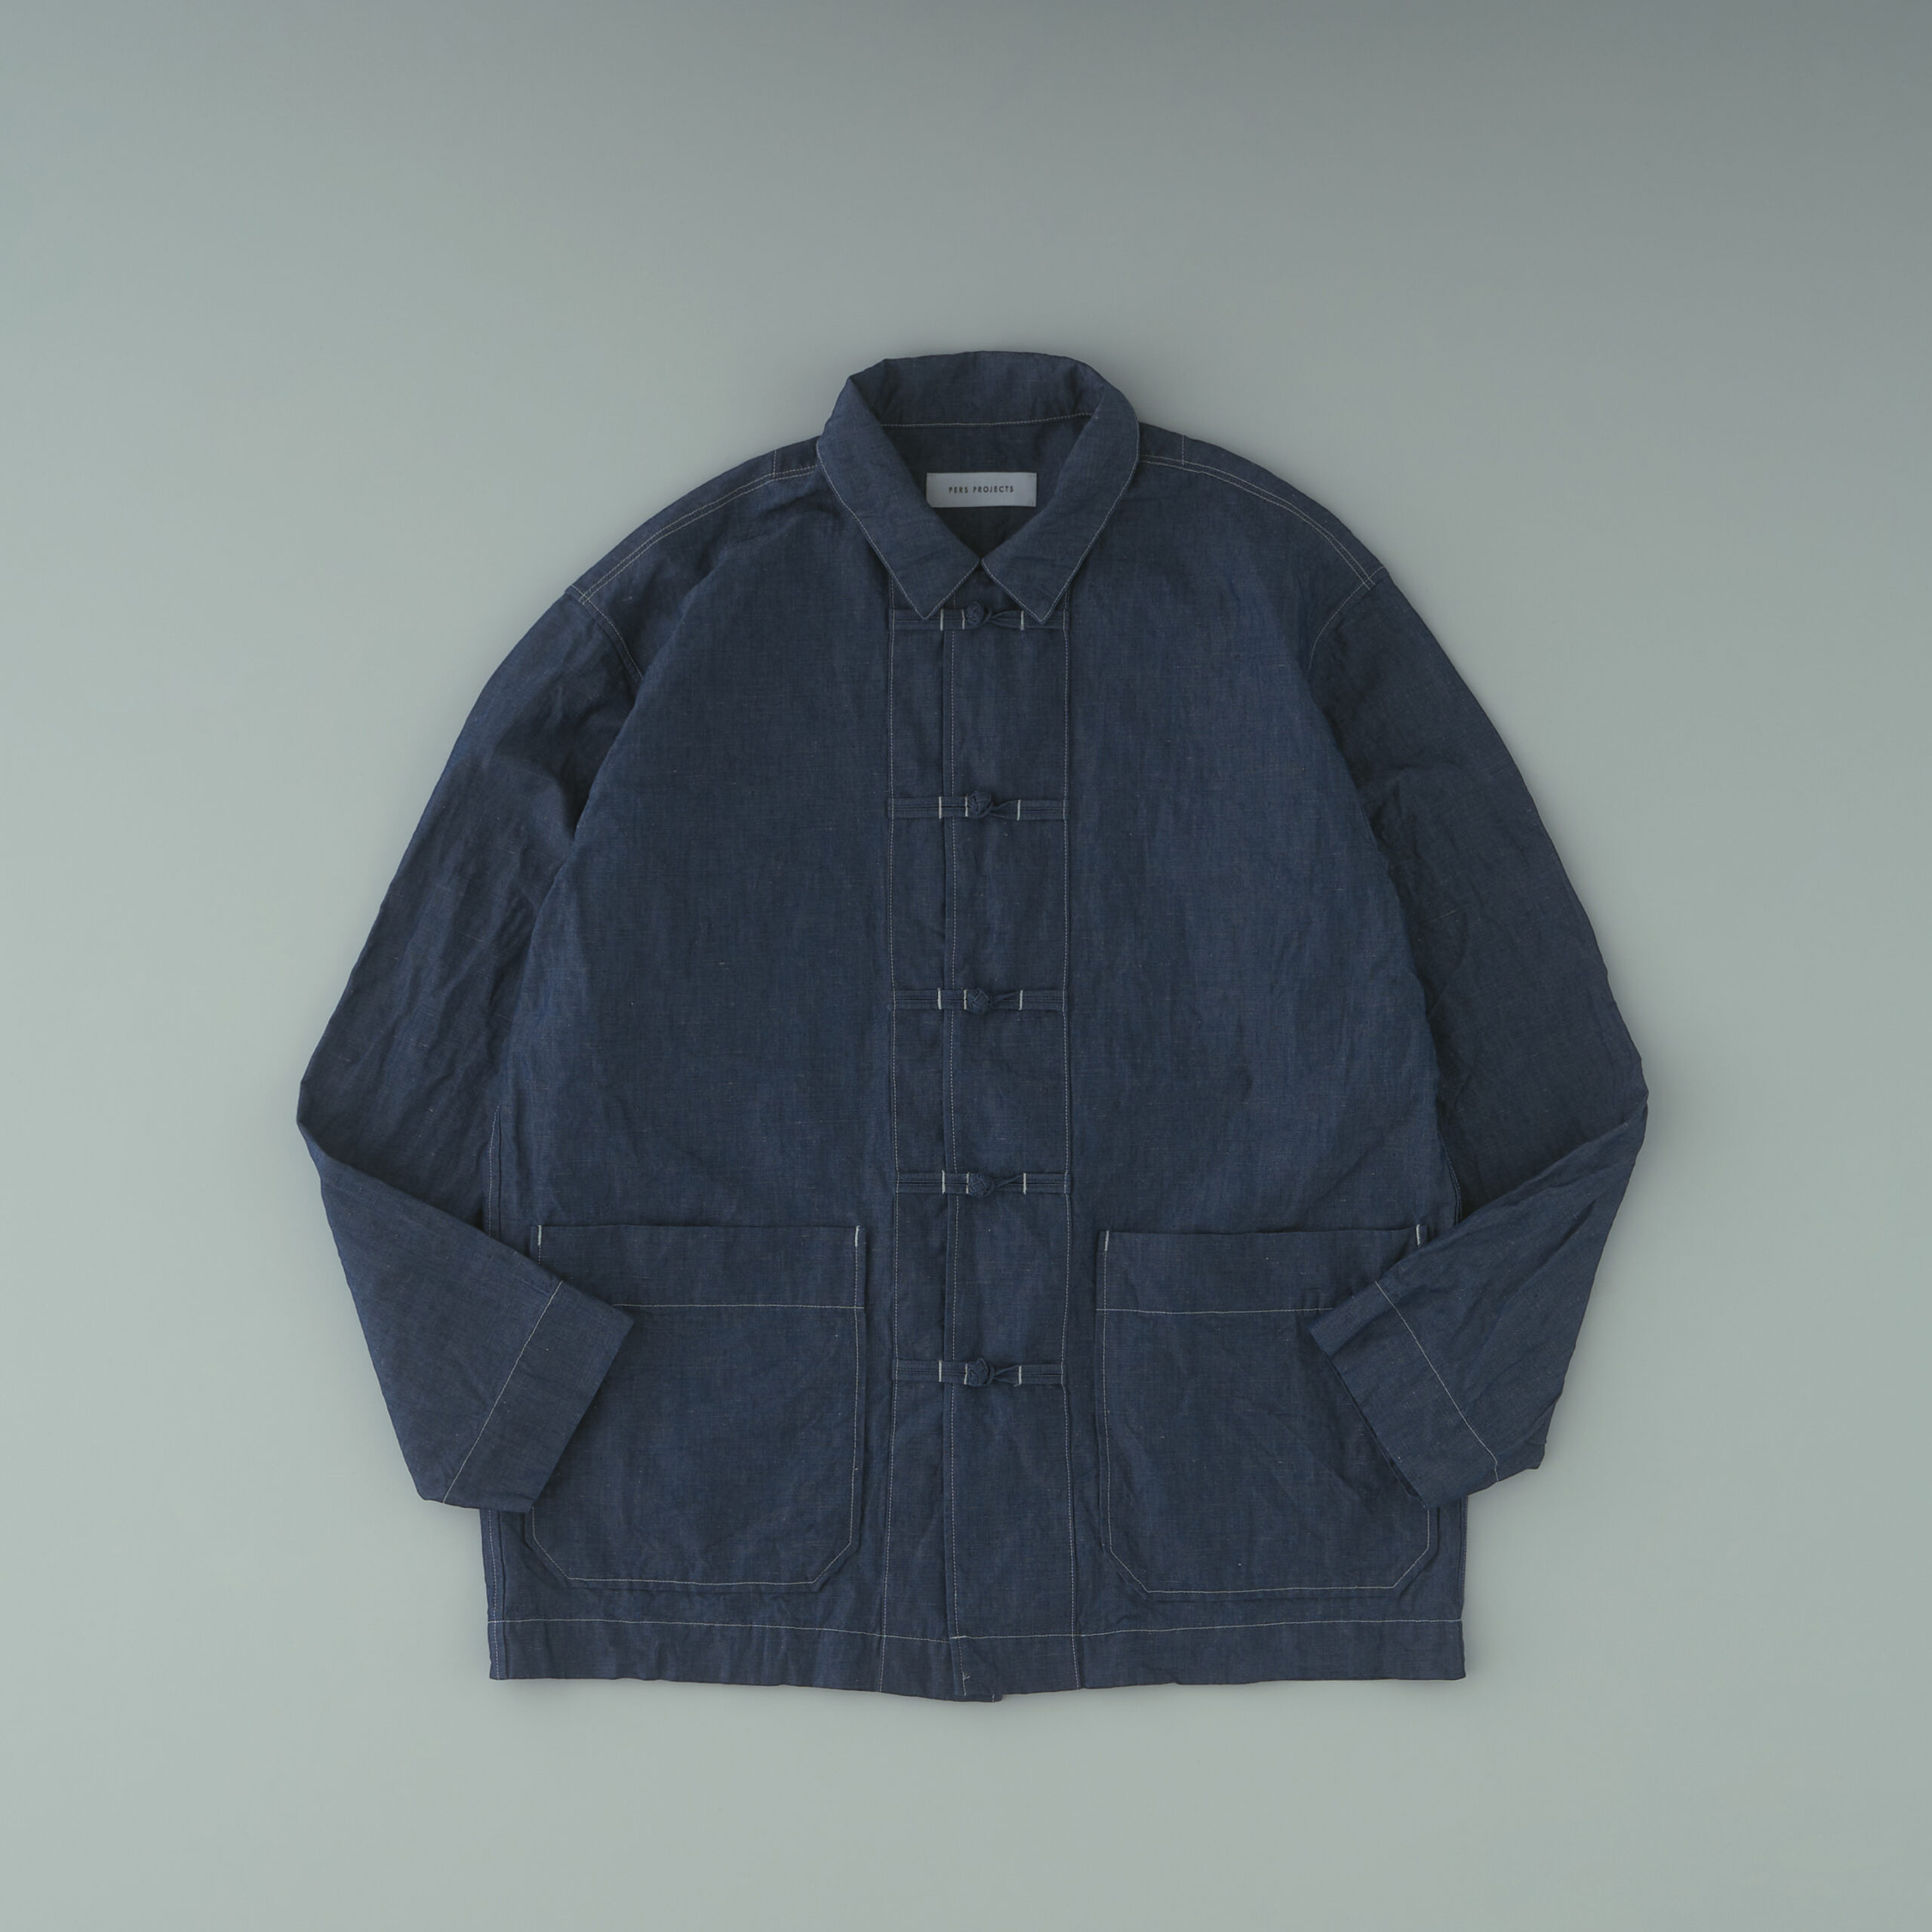 BLANCHE KNOT JACKET “LINEN CHABRAY”